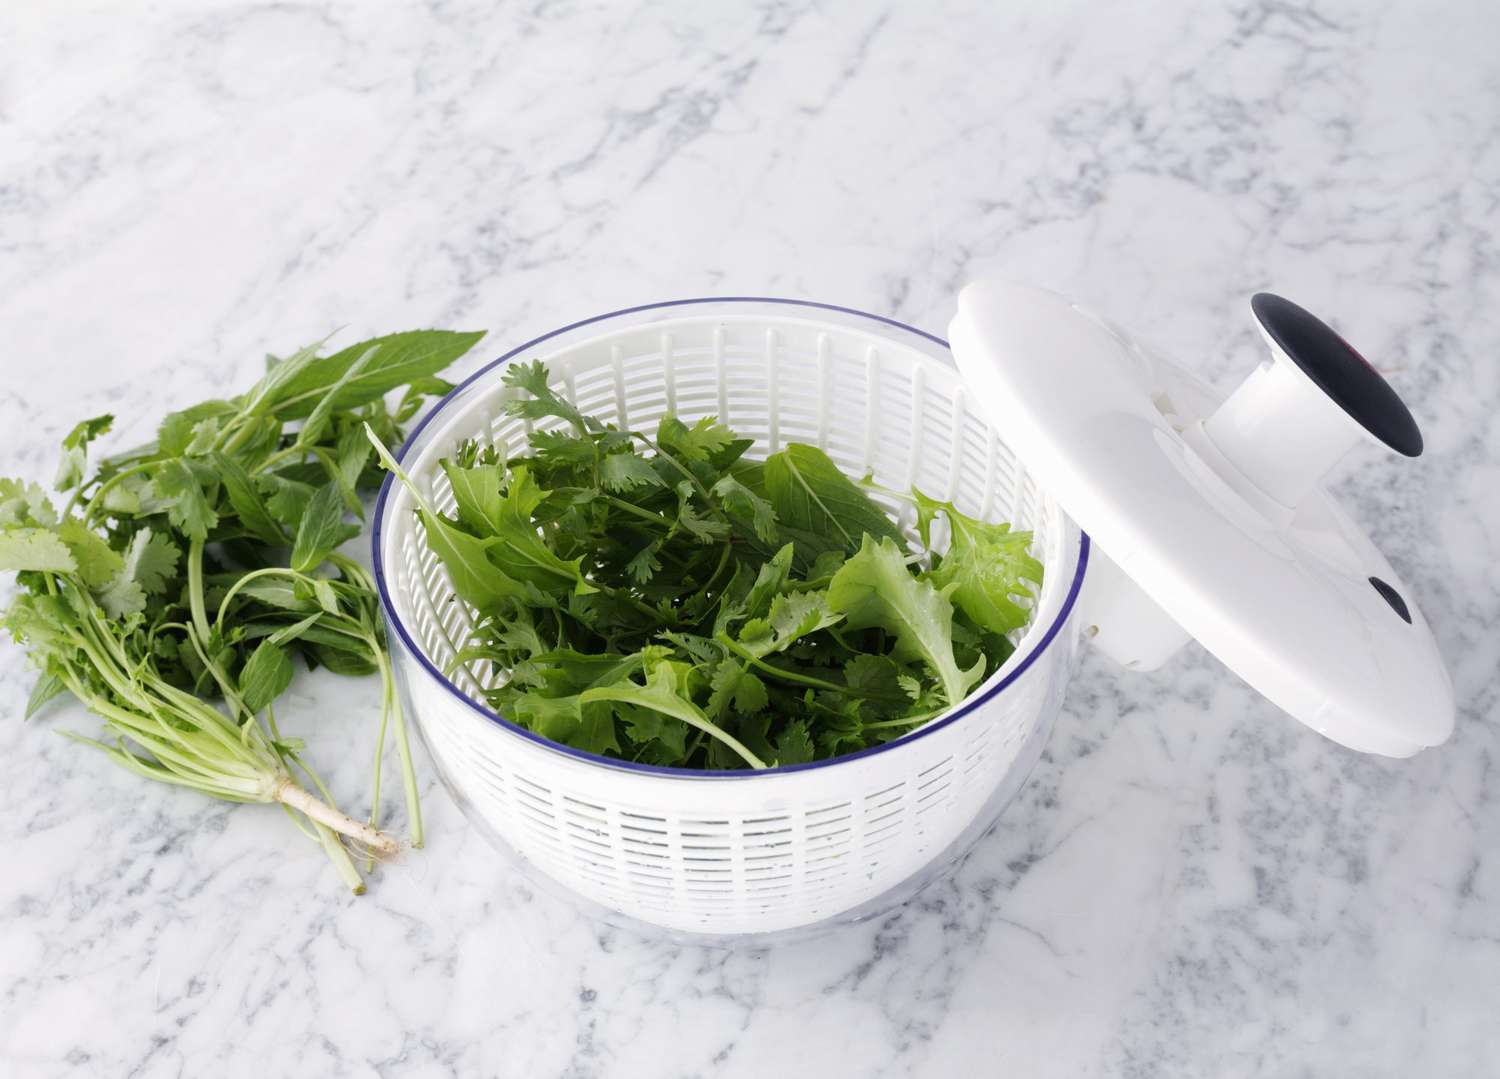 Safe food handling during proper cleaning of salad spinners